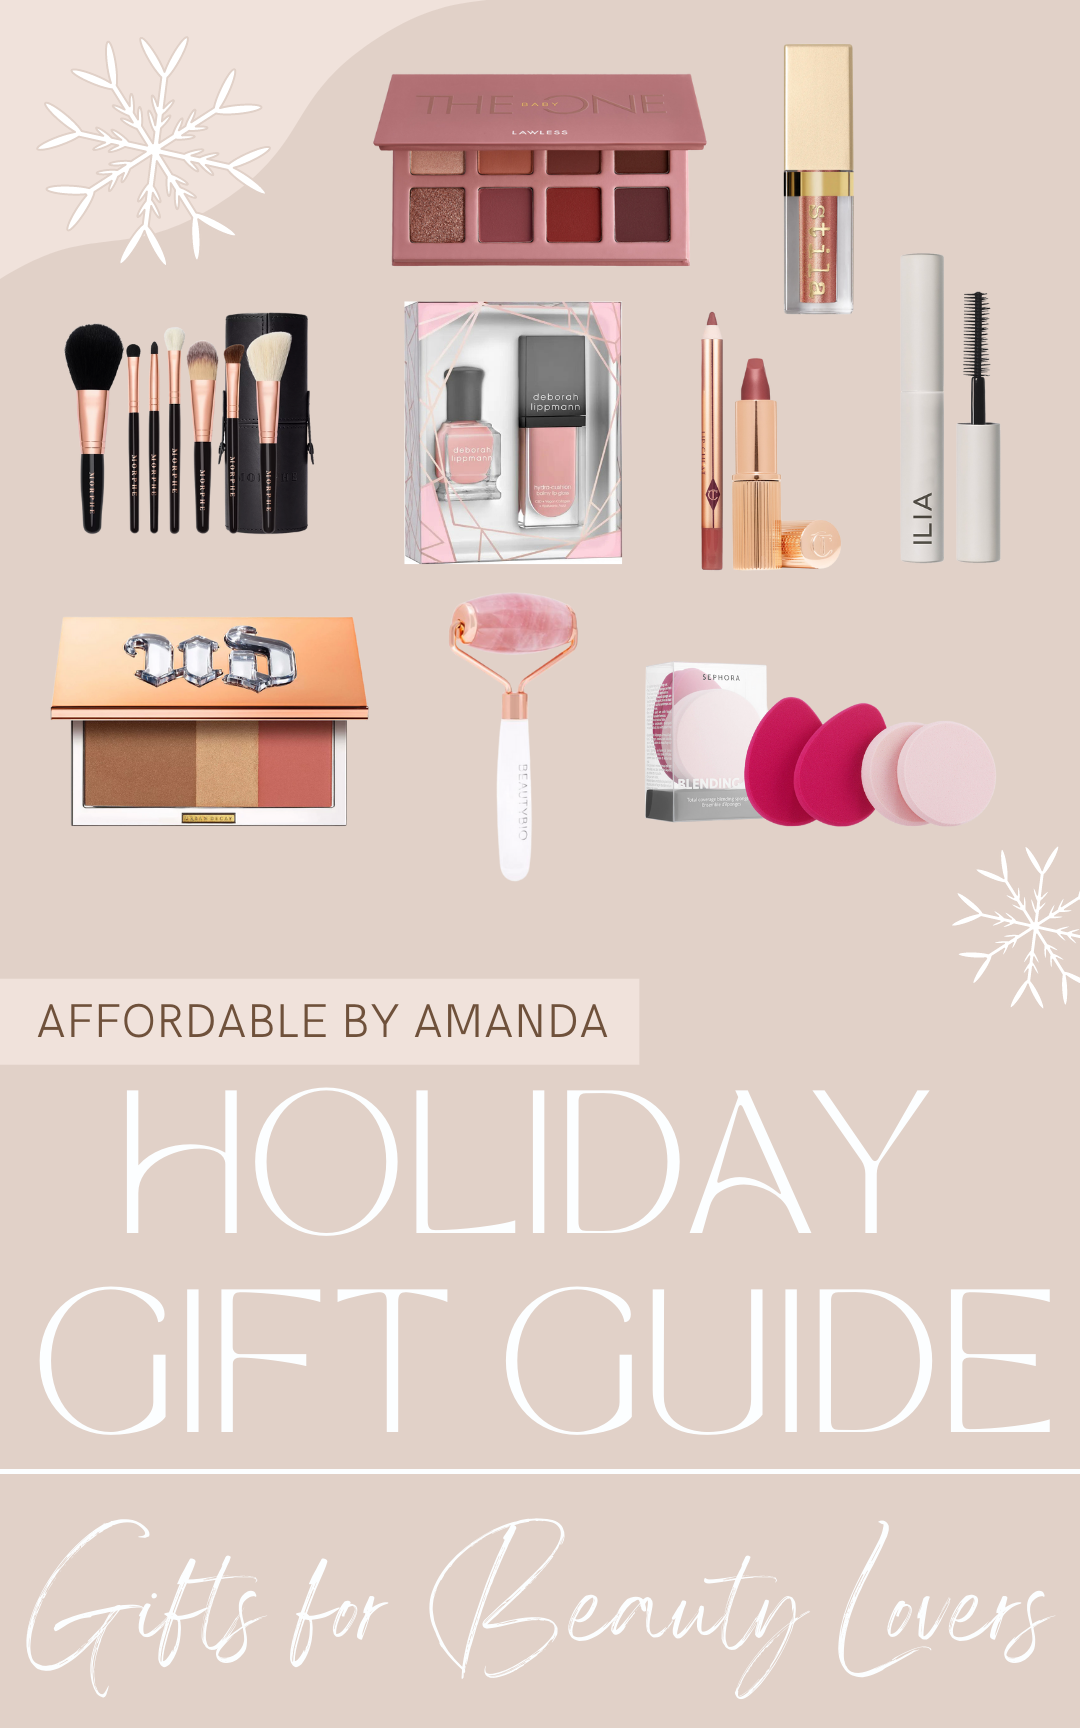 The Complete Gift Guide For Beauty Lovers. Gift Ideas for Beauty Lovers. Best Beauty Gifts 2021. Holiday Gifts for Beauty Lovers.